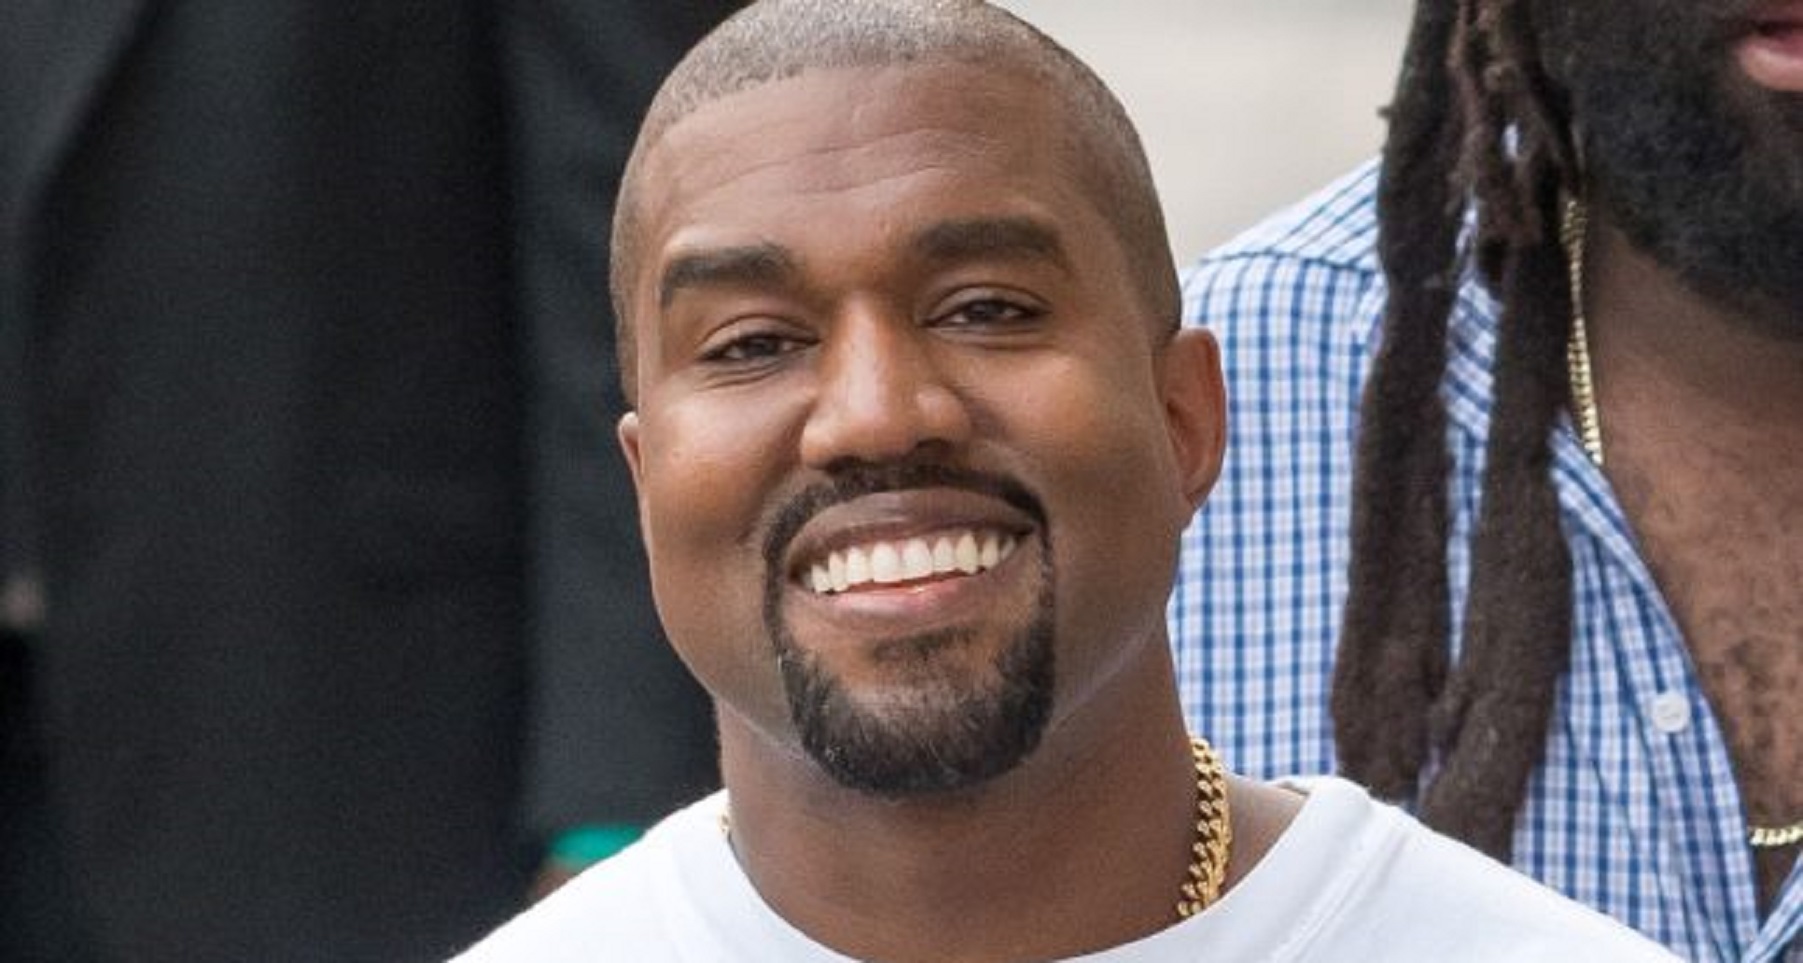 Kanye West: “I am unquestionably, undoubtedly, the greatest human artist of all time”